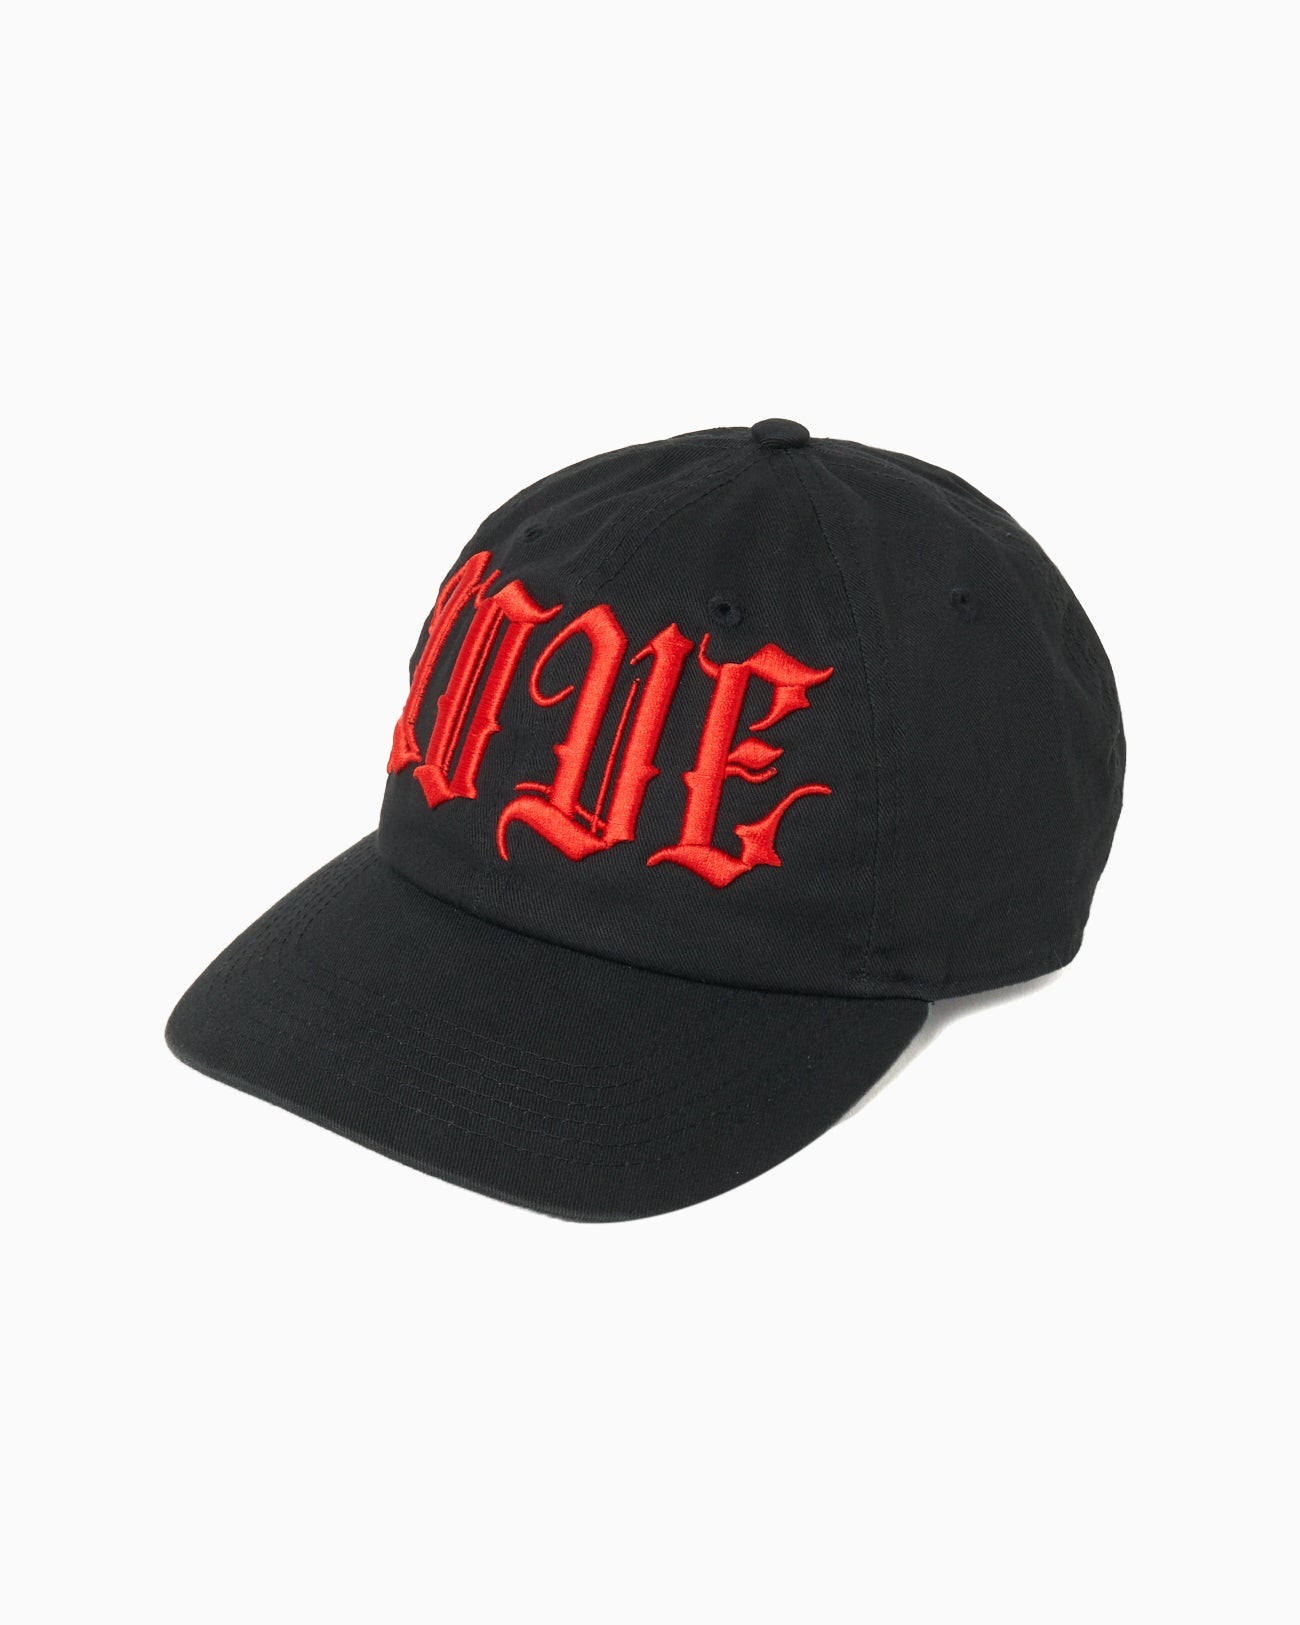 【STUDIOUS Special item】LOVE cap Red【Delivery in February 2024】Pop up